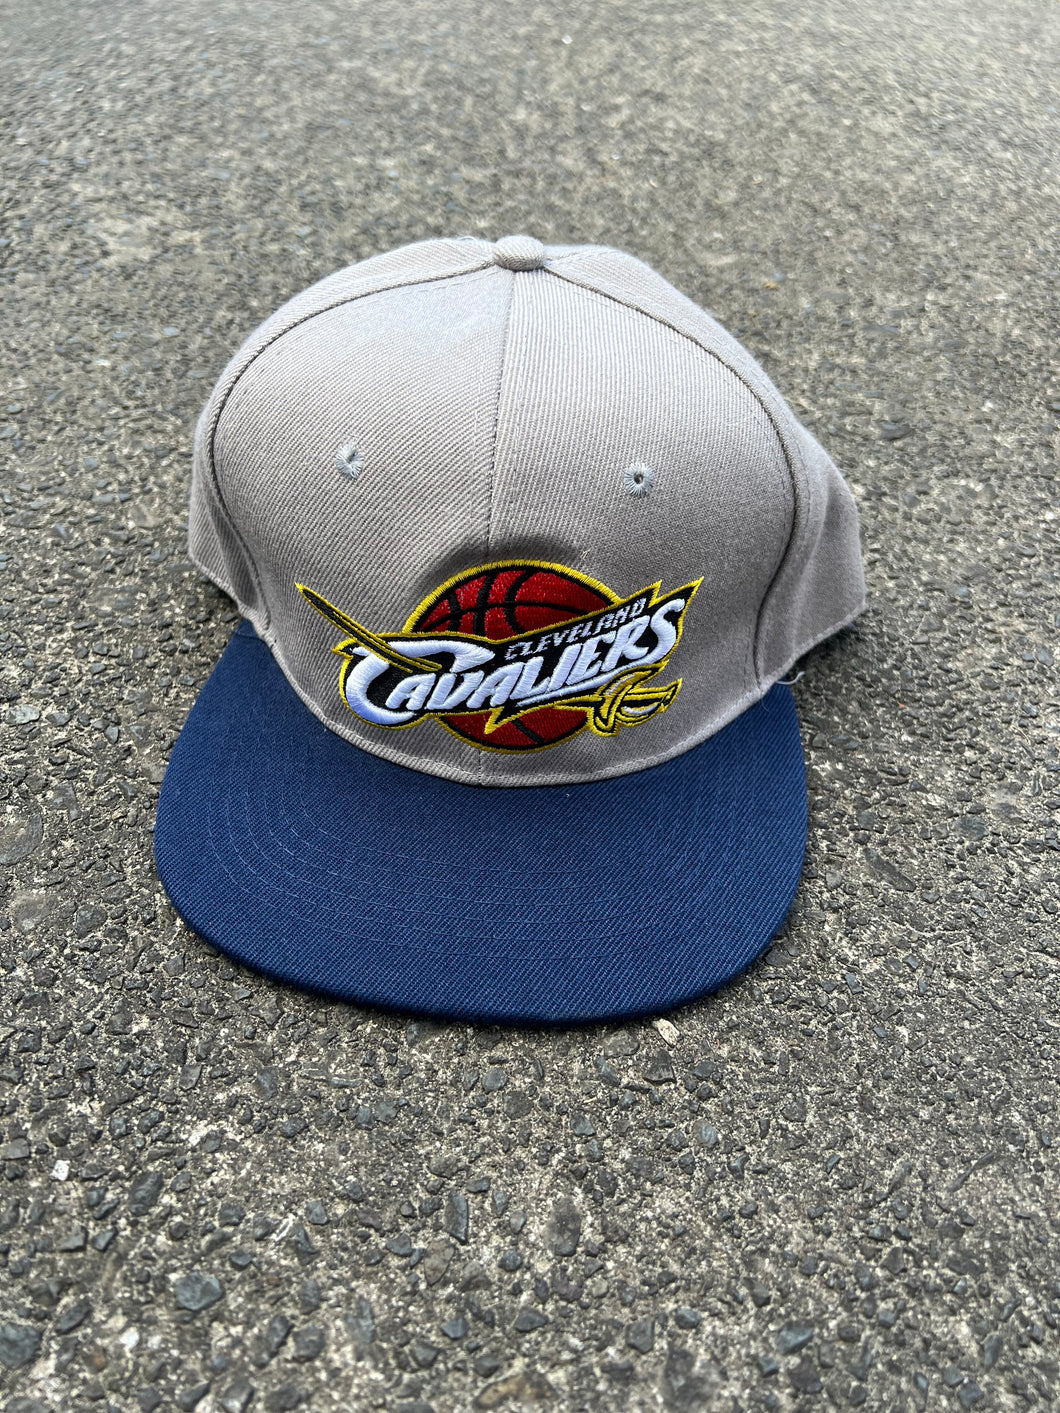 NBA - CLEVELAND CAVALIERS SNAPBACK HAT - ONE SIZE FITS ALL OSFA